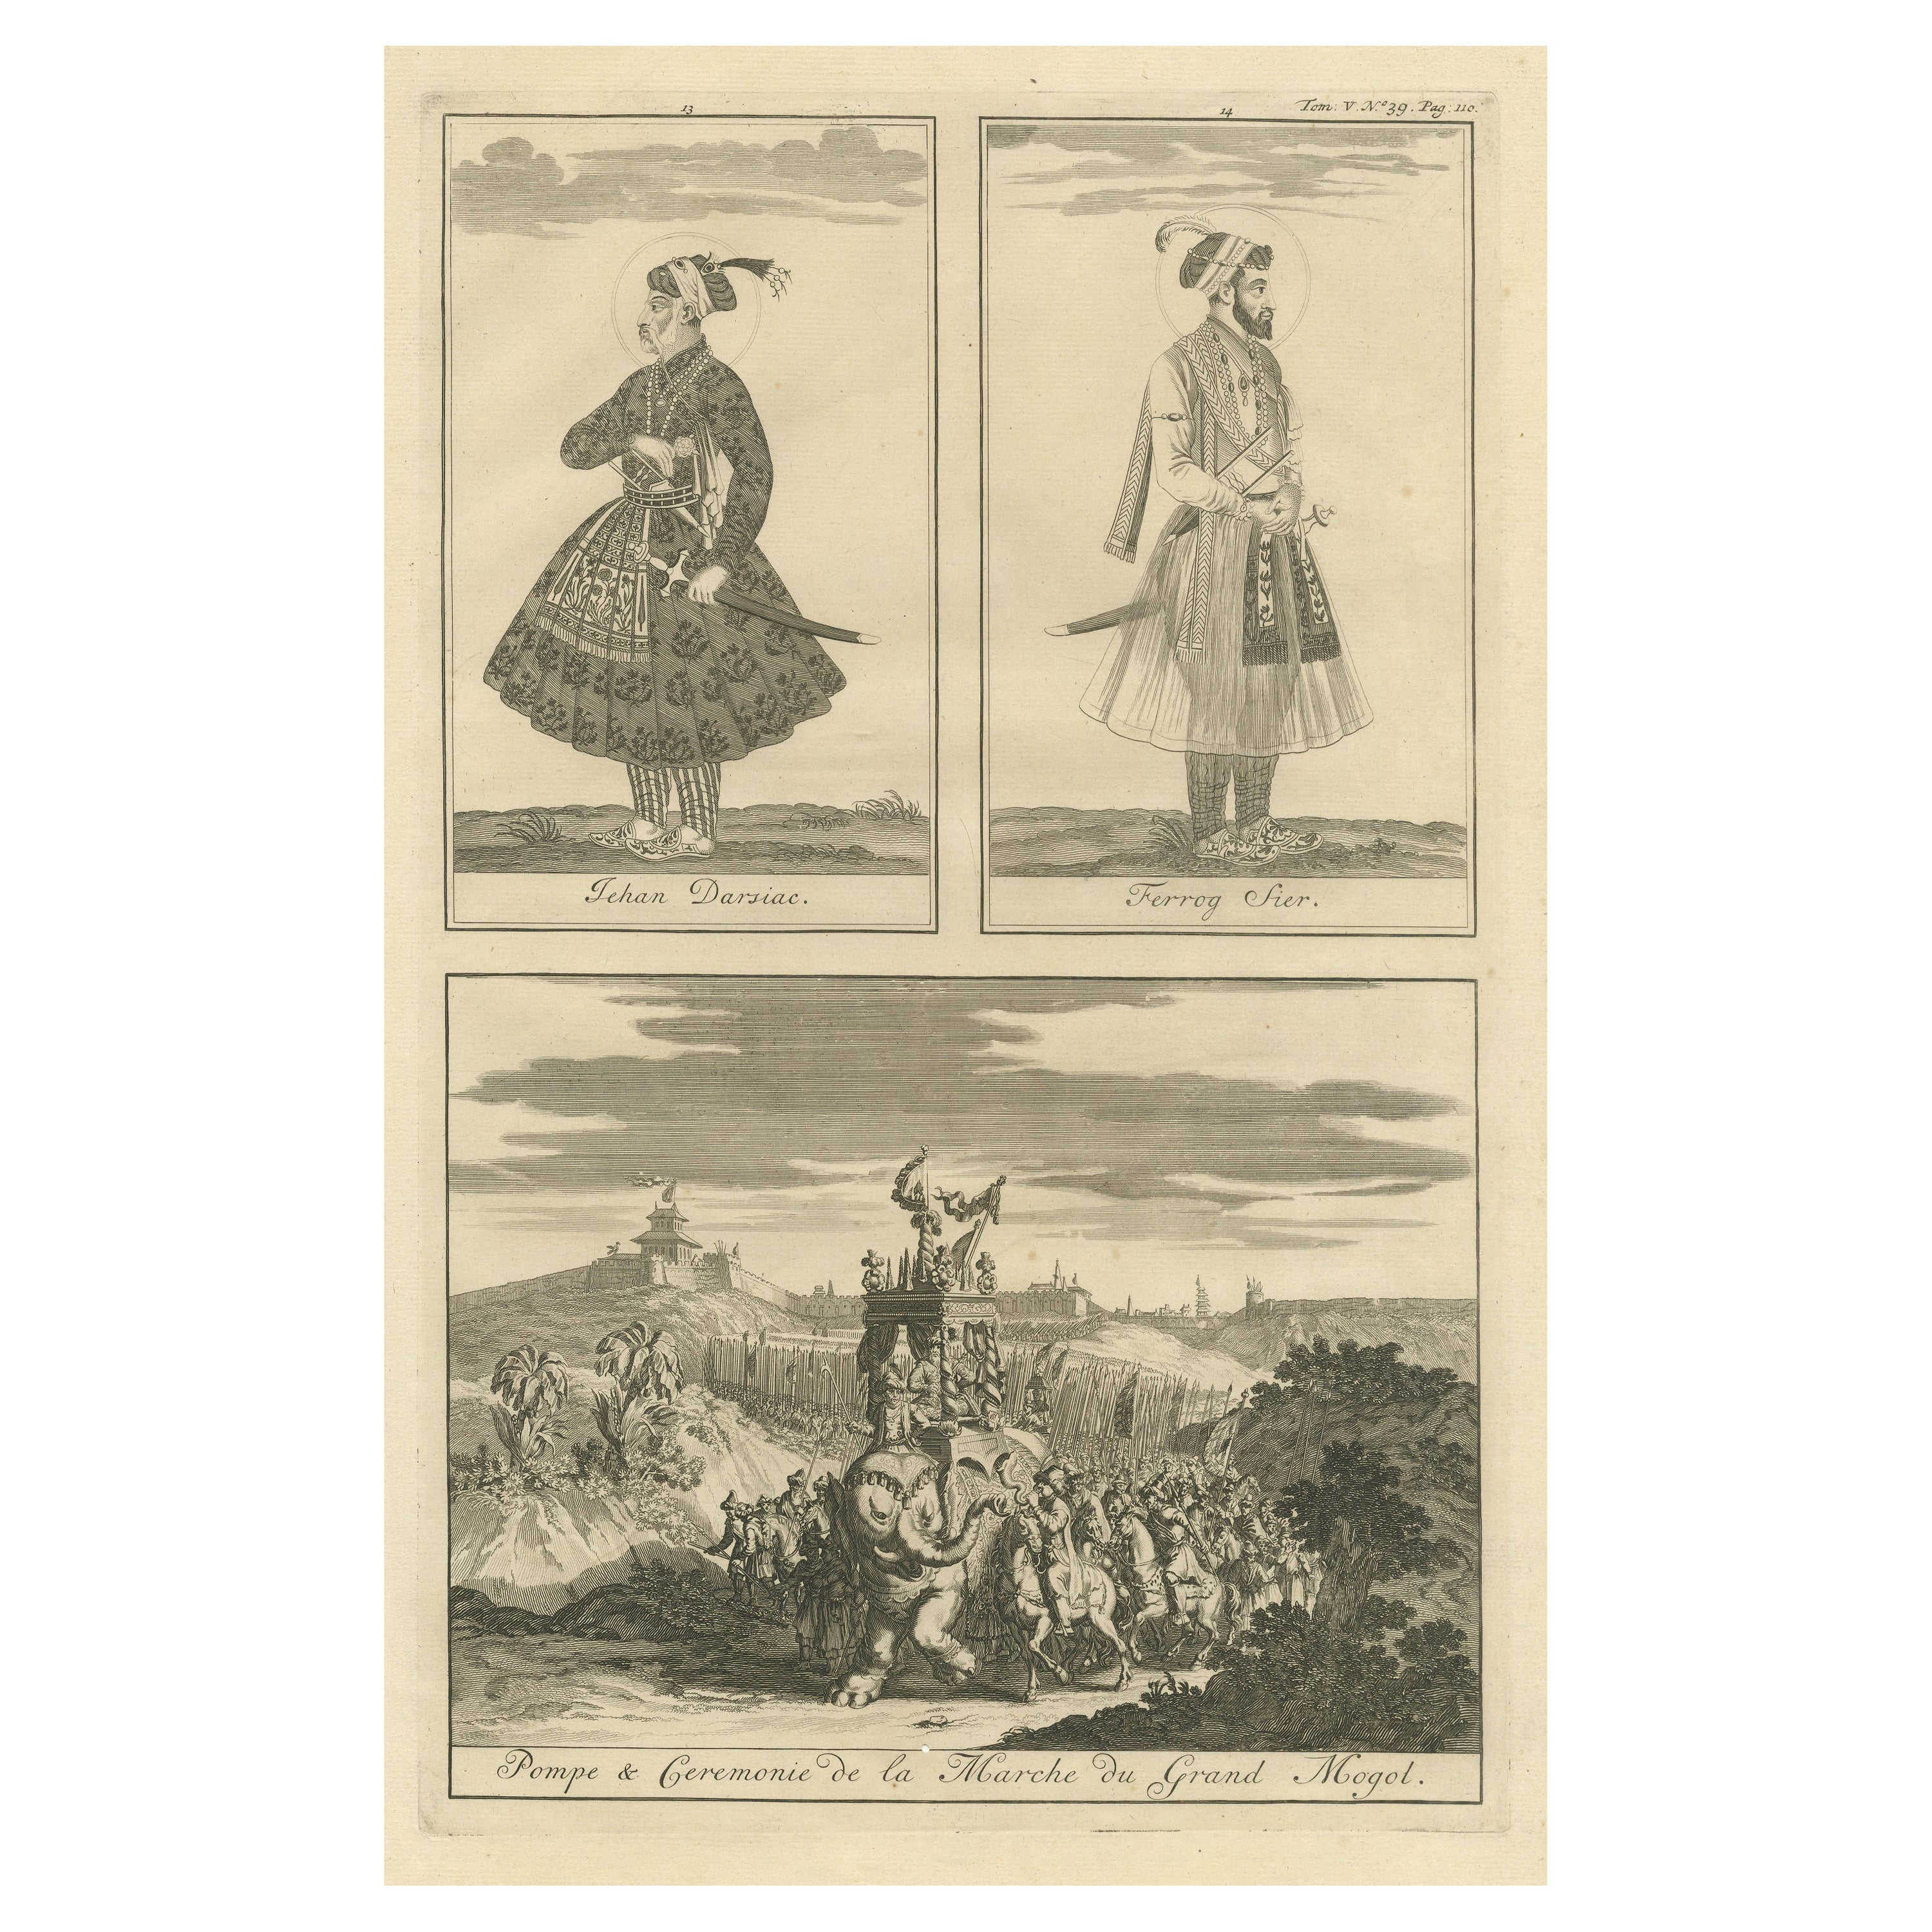 Antique Print of Portraits of Emperors and a Parade for the Grand Mogul